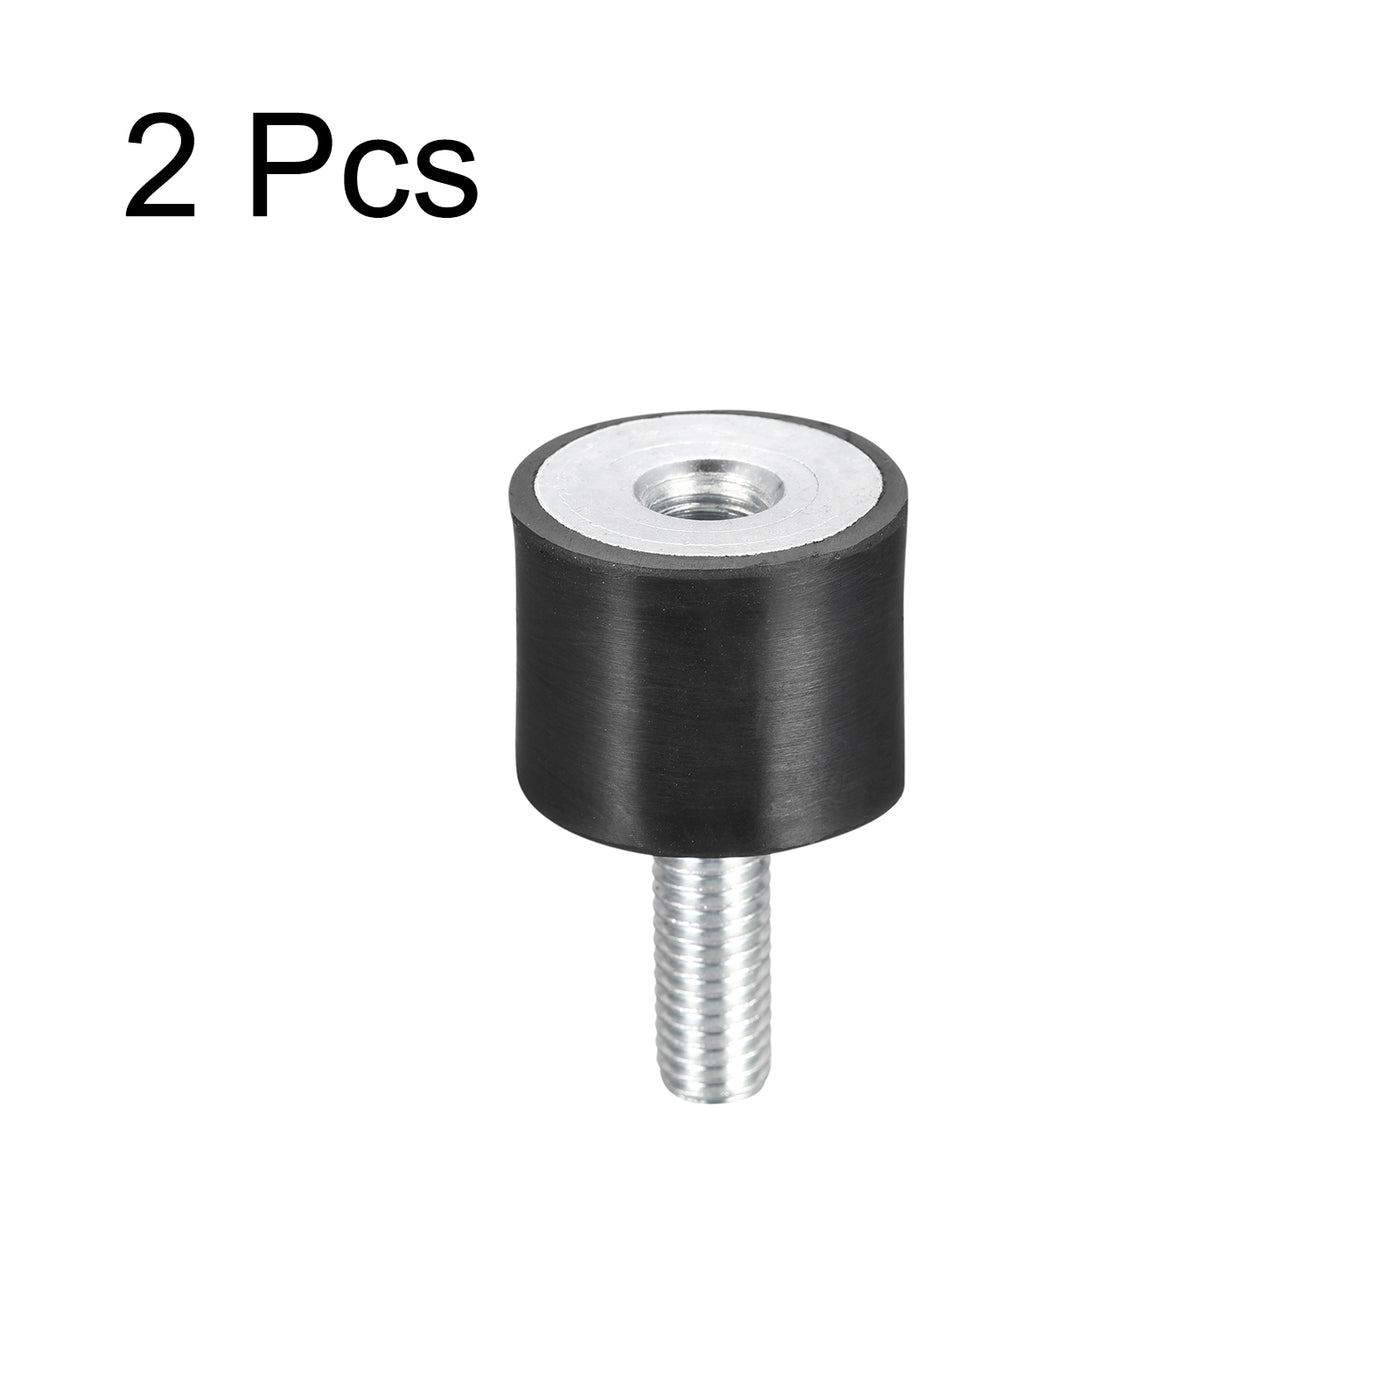 uxcell Uxcell Rubber Mount 2pcs M8 Male/Female Vibration Isolator Shock Absorber D25mmxH20mm